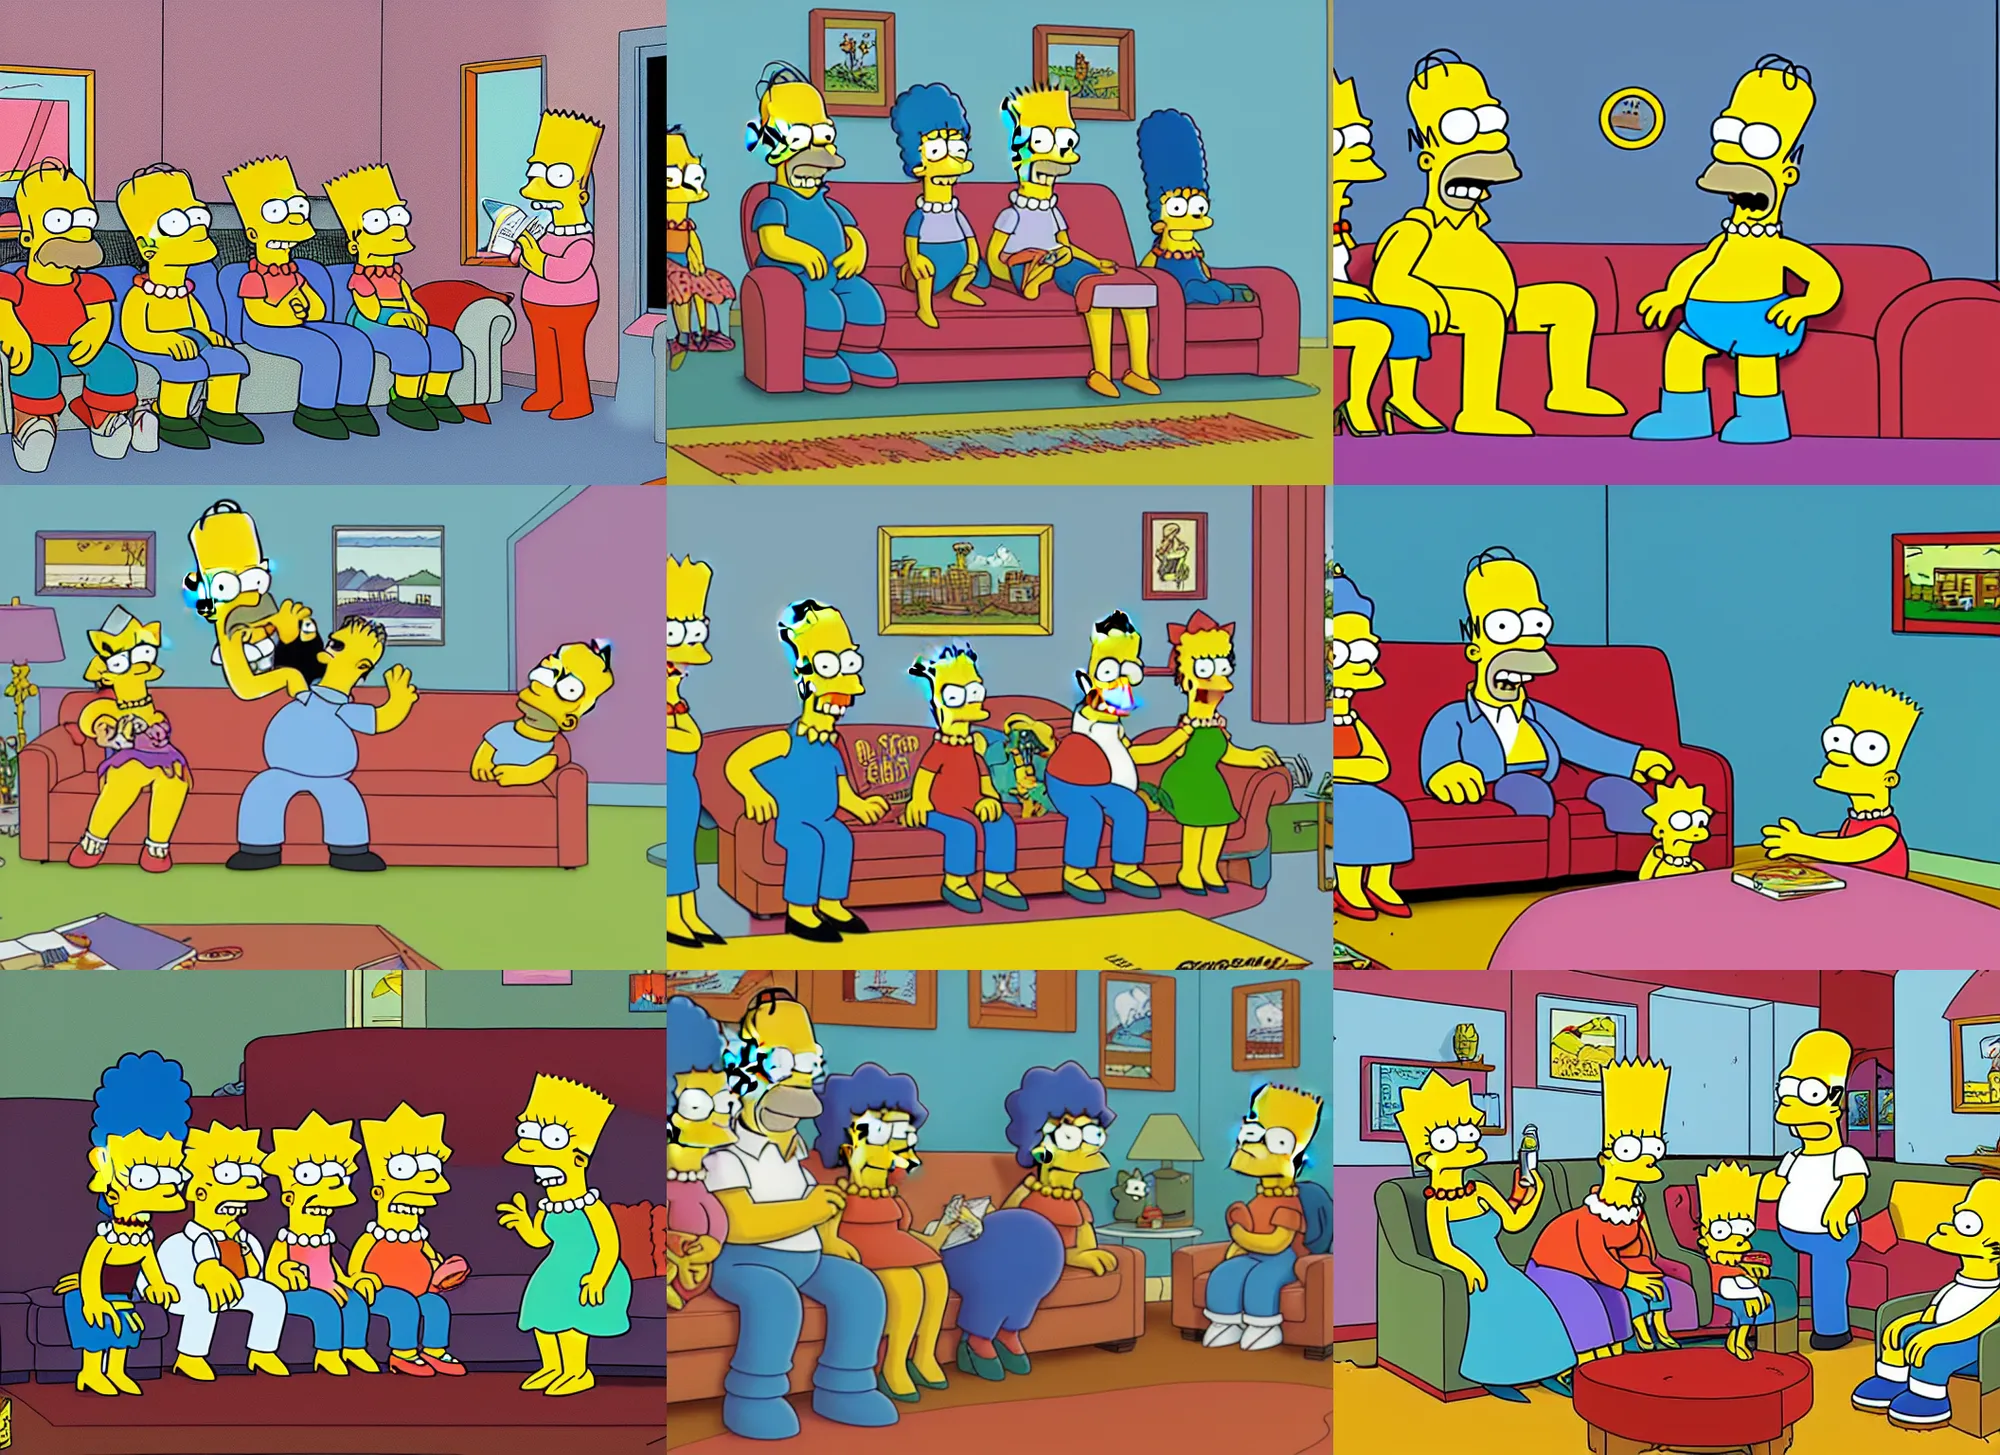 Prompt: the simpsons couch gag, cartoon by matt groening